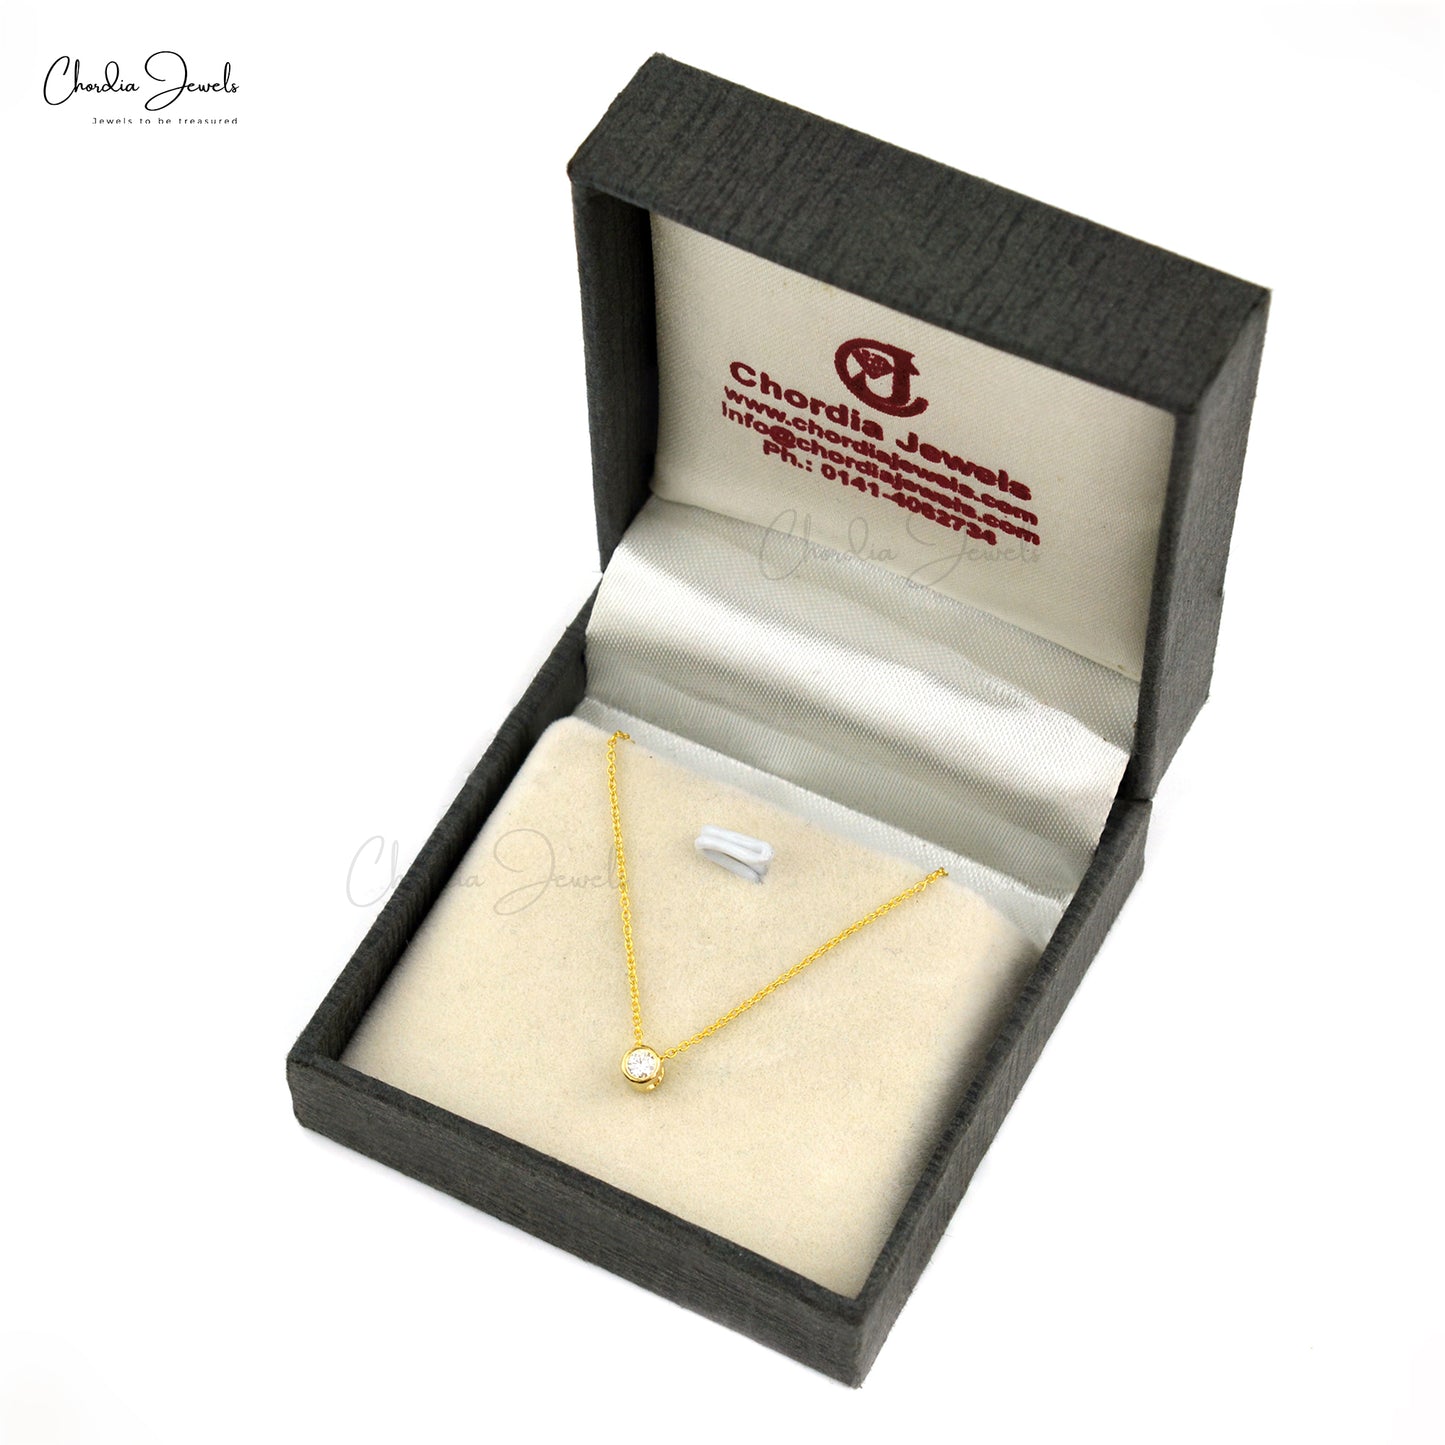 Certified Solitaire Diamond Necklace 0.1 ct. Yellow Gold